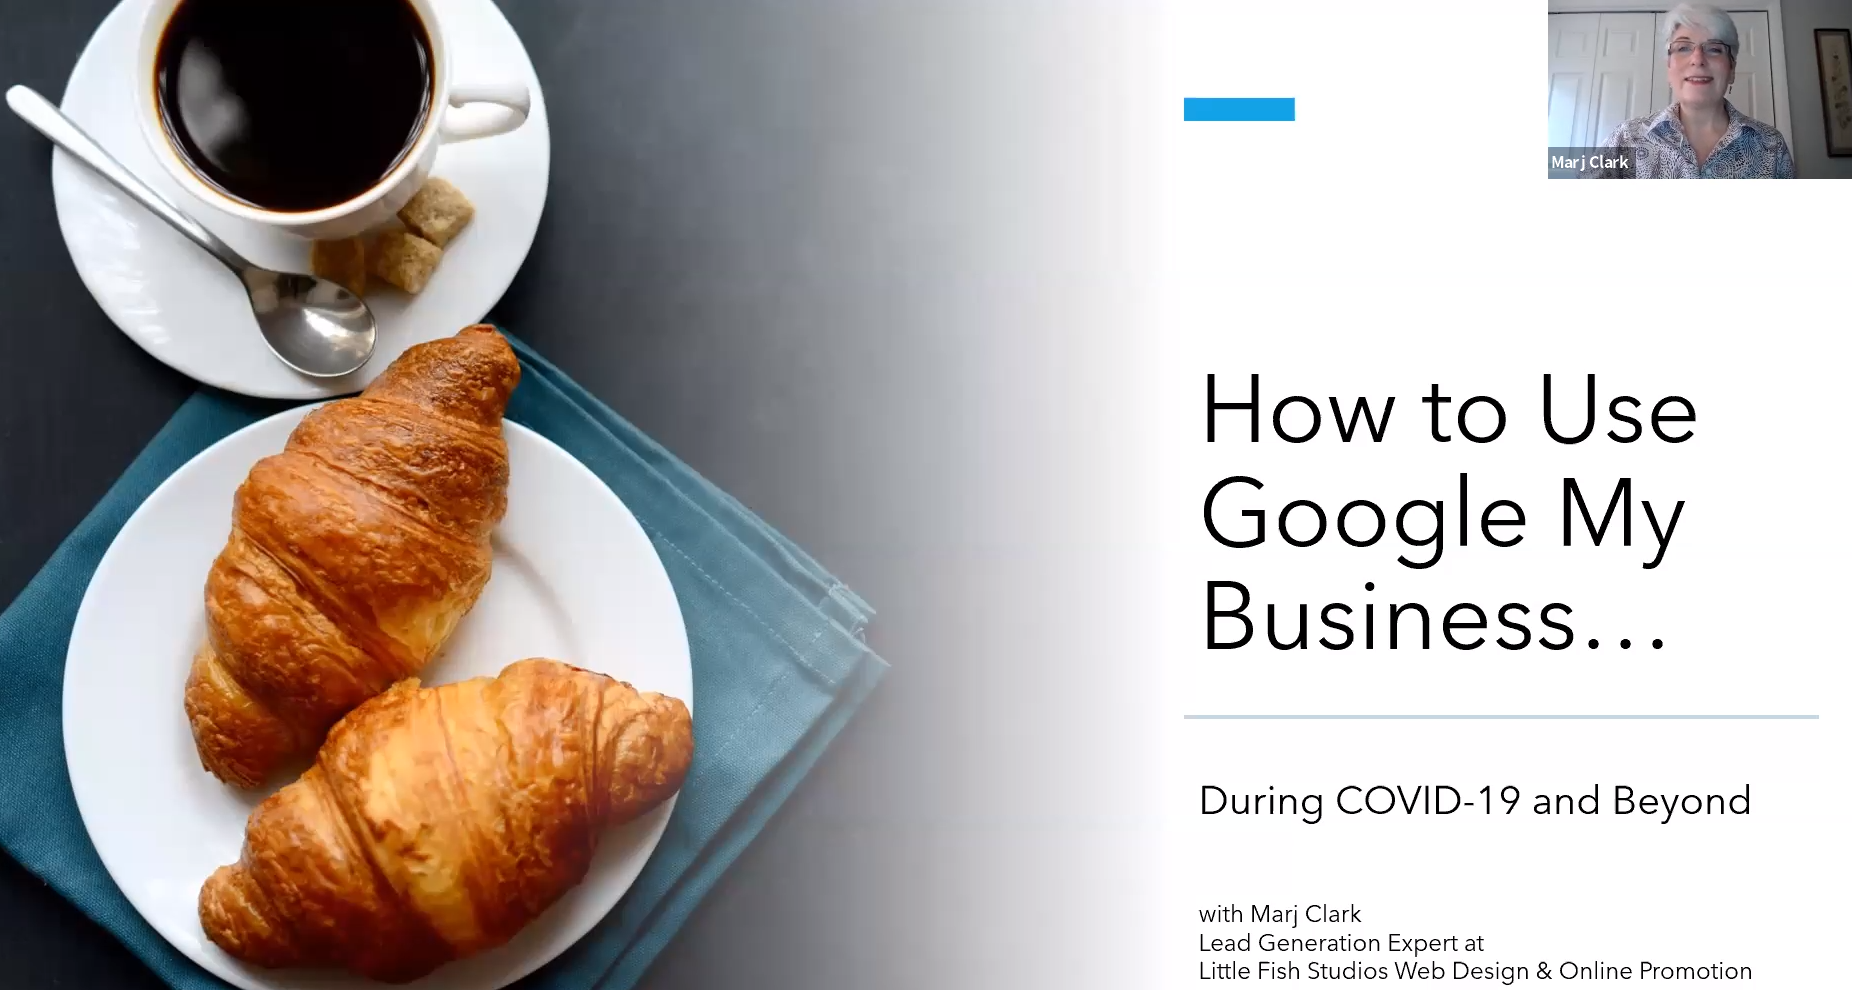 How to Use Google My Business During COVID-19 and Beyond